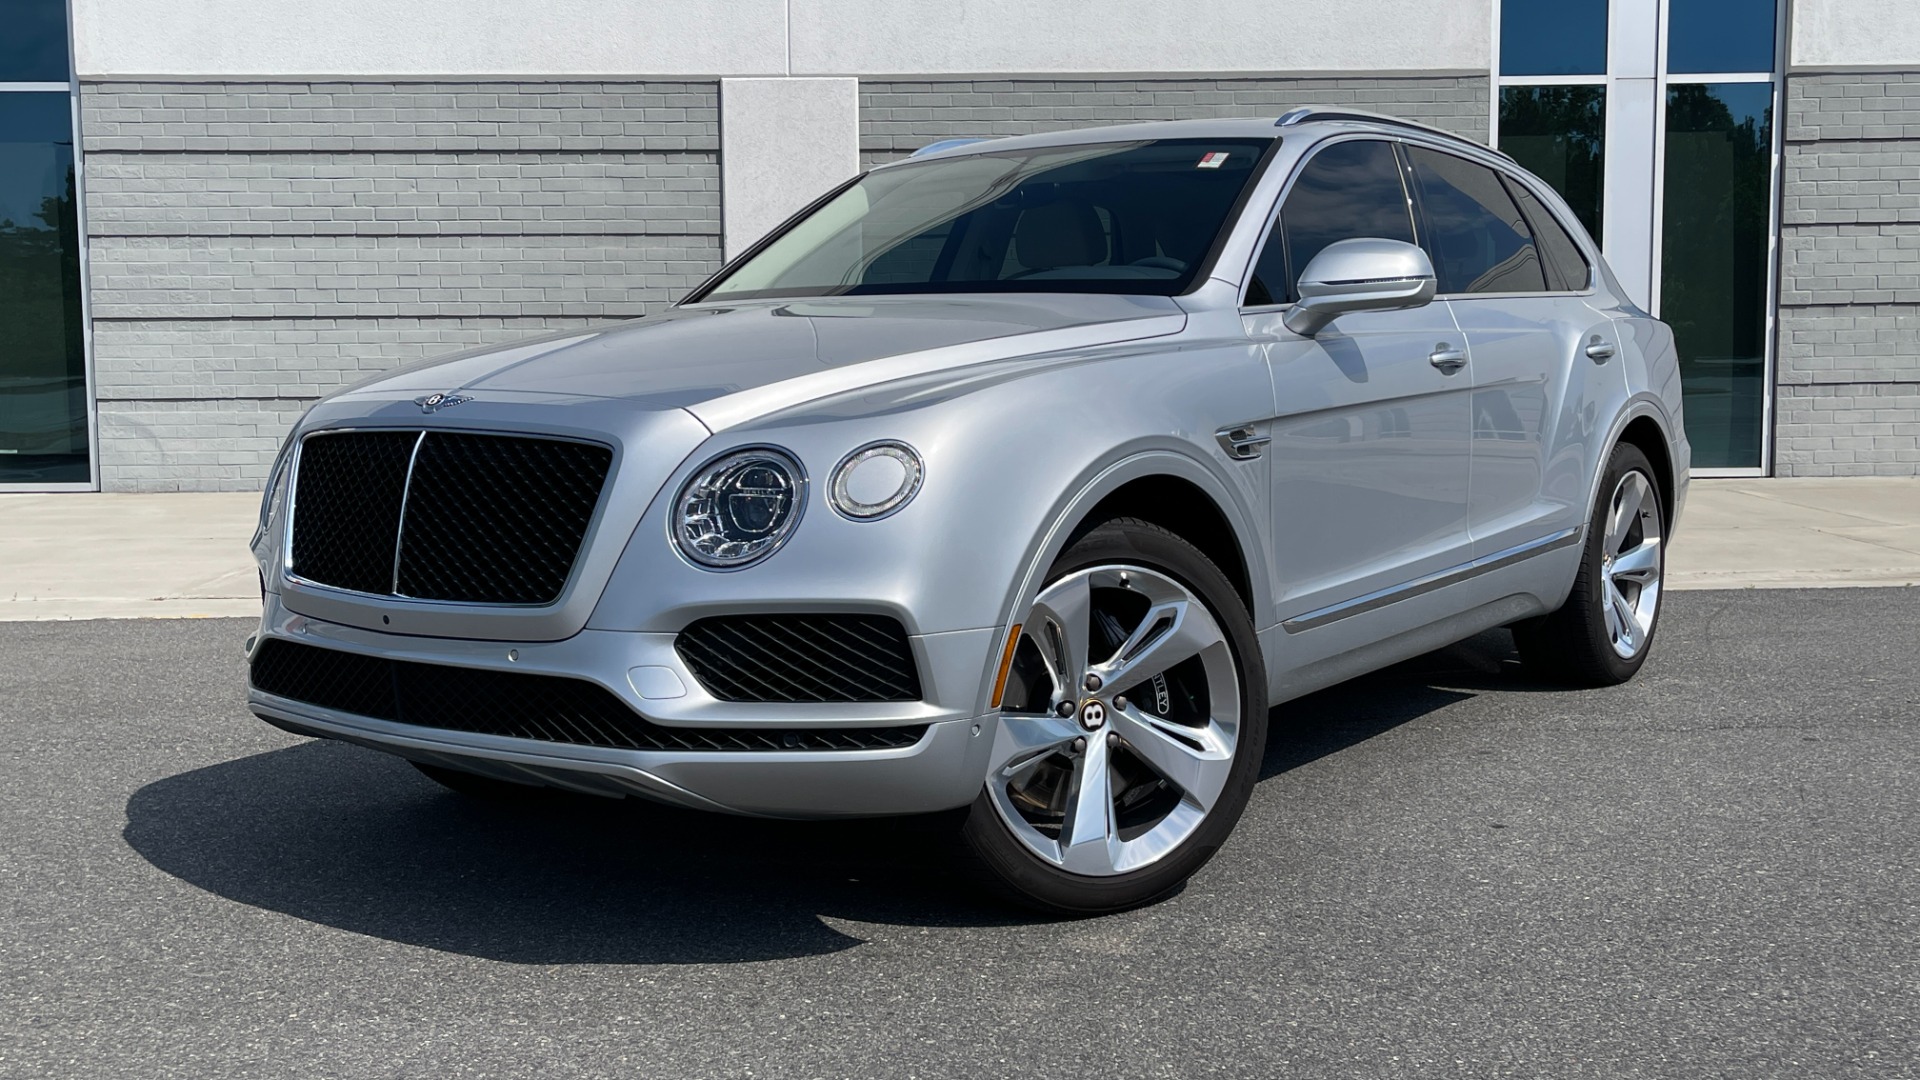 Used 2019 Bentley BENTAYGA V8 / AWD / NAV / SUNROOF / LED LIGHTING / PREMIUM AUDIO / REARVIEW for sale $125,000 at Formula Imports in Charlotte NC 28227 1